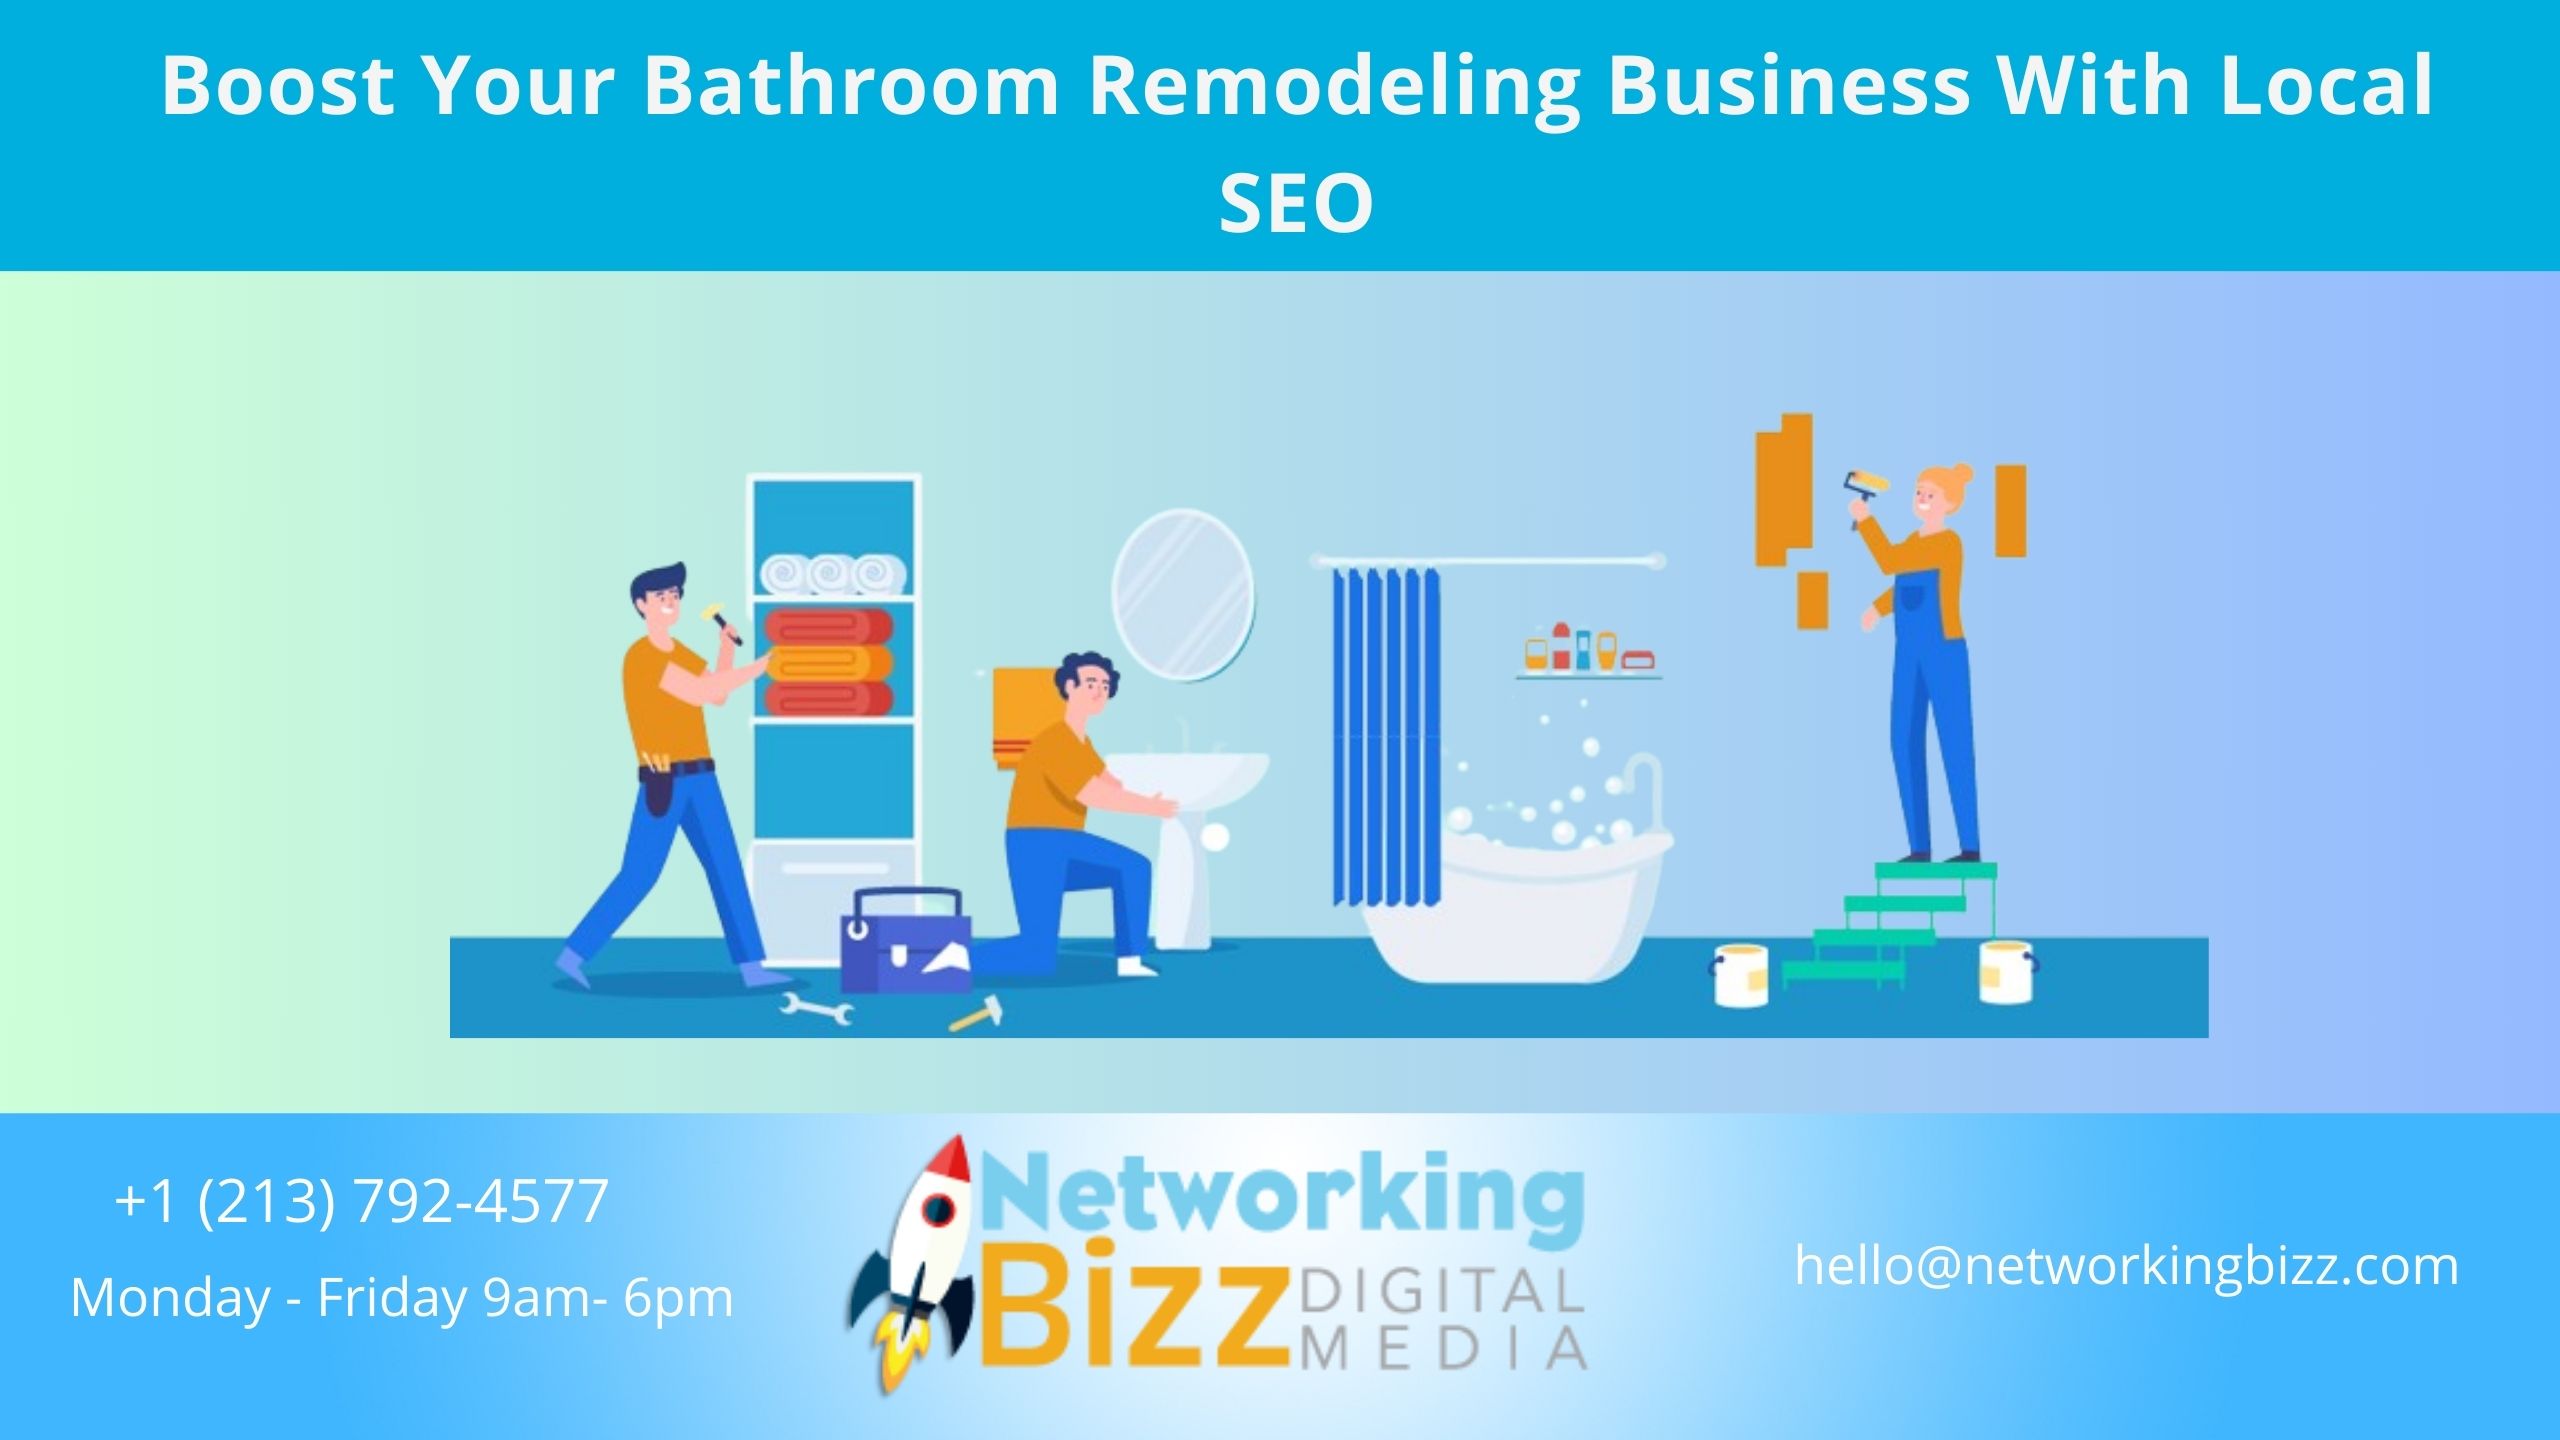 Boost Your Bathroom Remodeling Business With Local SEO